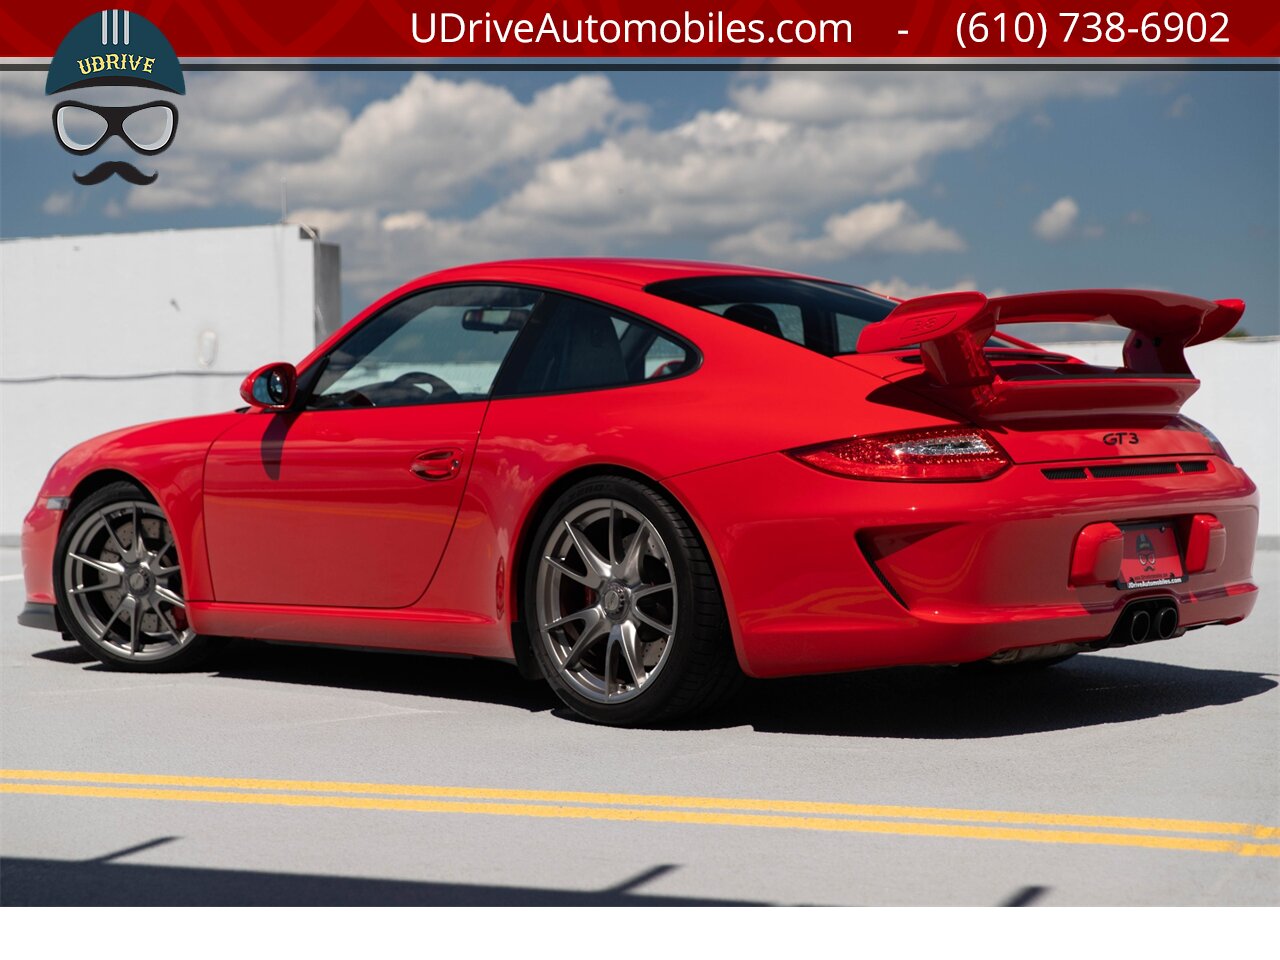 2010 Porsche 911 GT3 997.2 Purist Example 1 Owner 8k Miles   - Photo 5 - West Chester, PA 19382